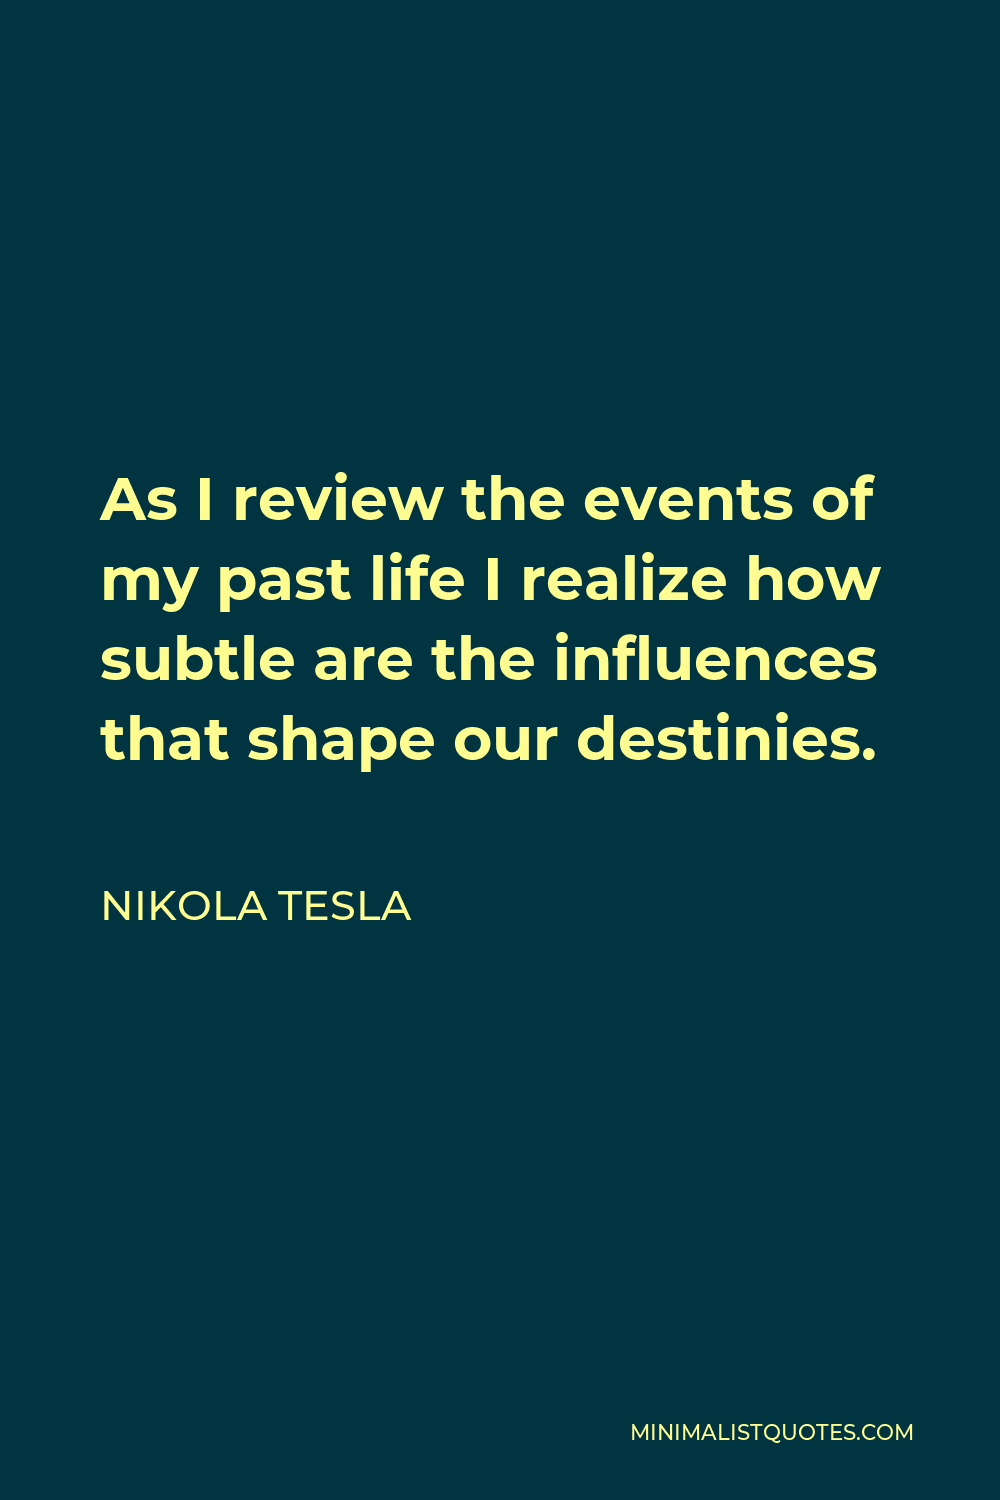 Nikola Tesla Quote - As I review the events of my past life I realize how subtle are the influences that shape our destinies.